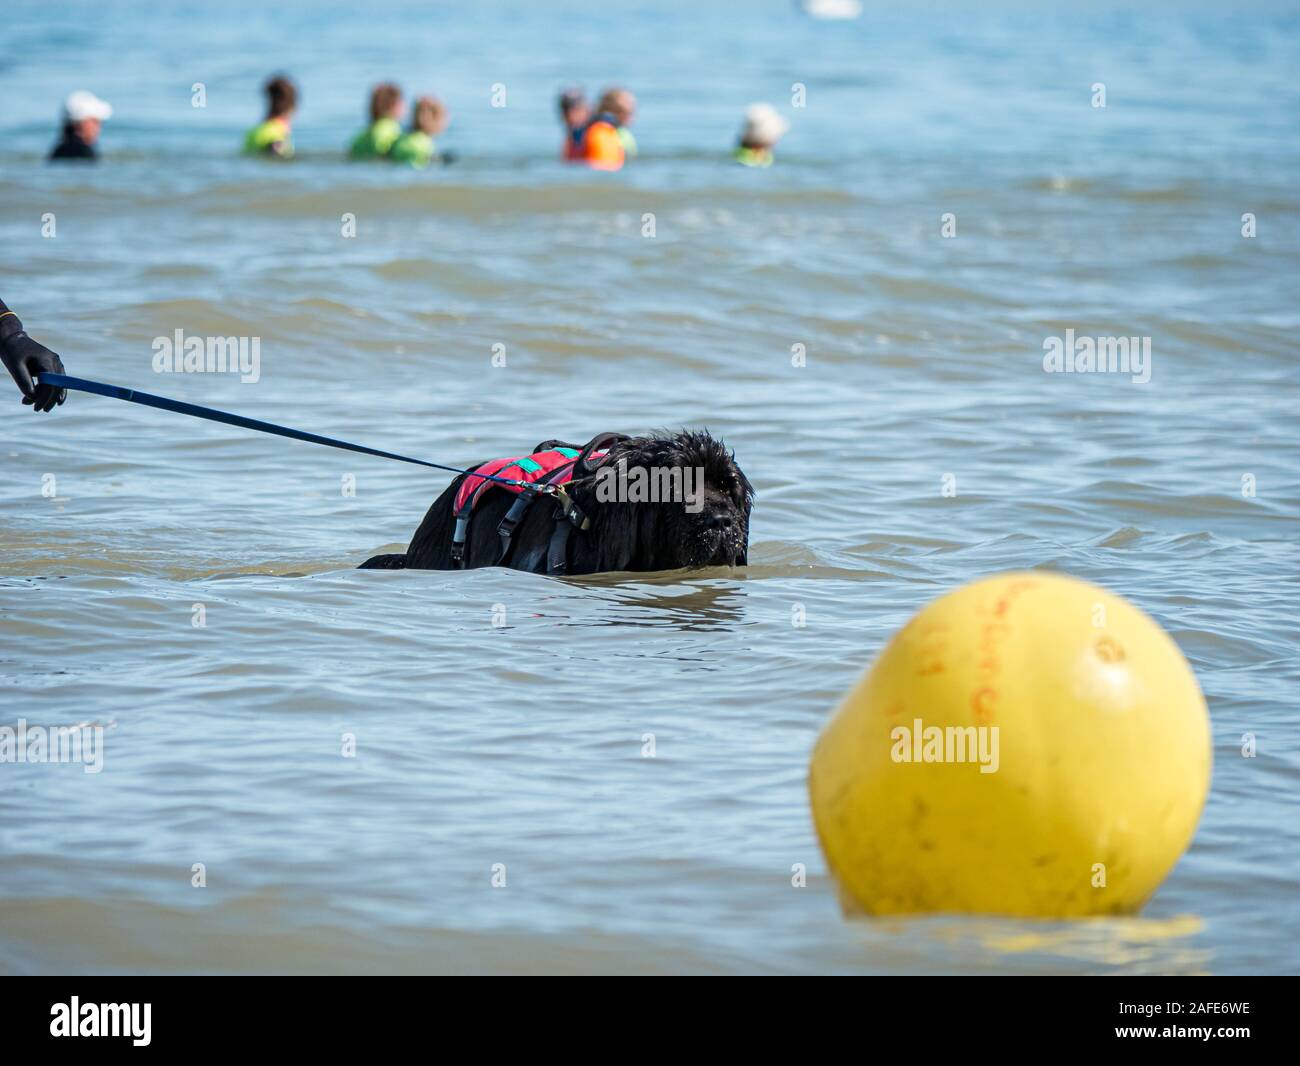 Water rescue dog training in ocean Stock Photo